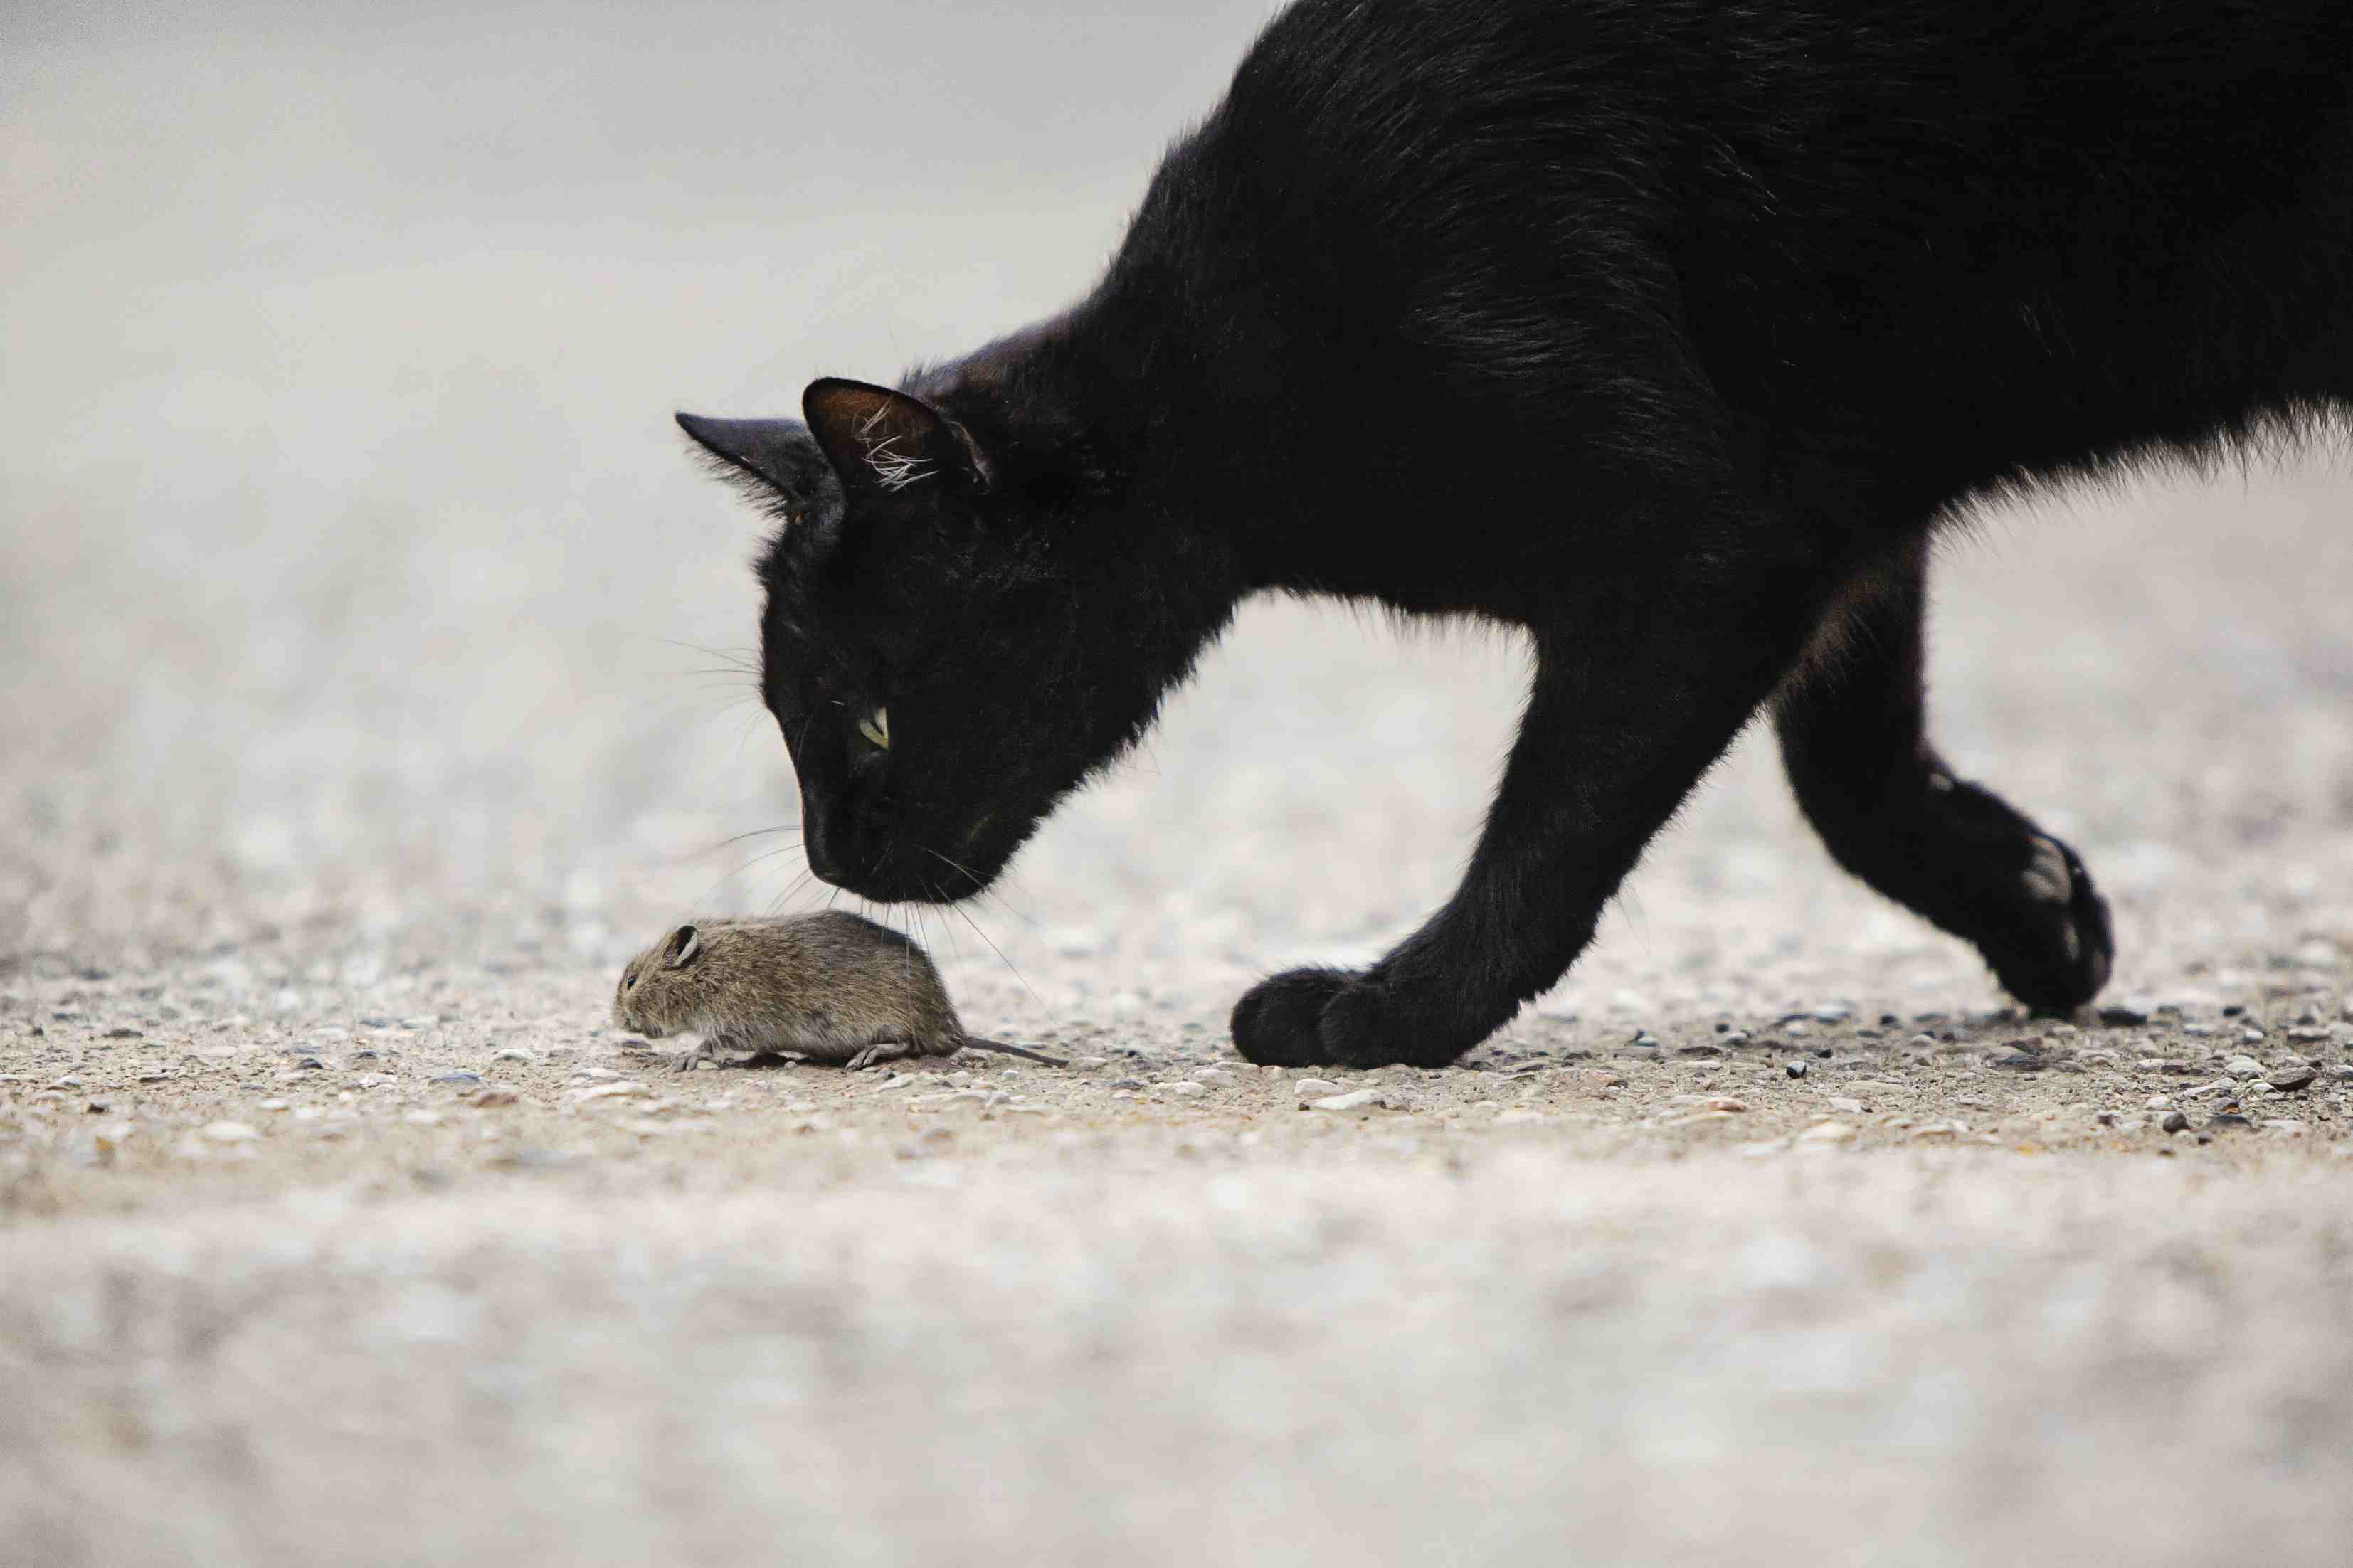 Black cat sniffing at a mouse.